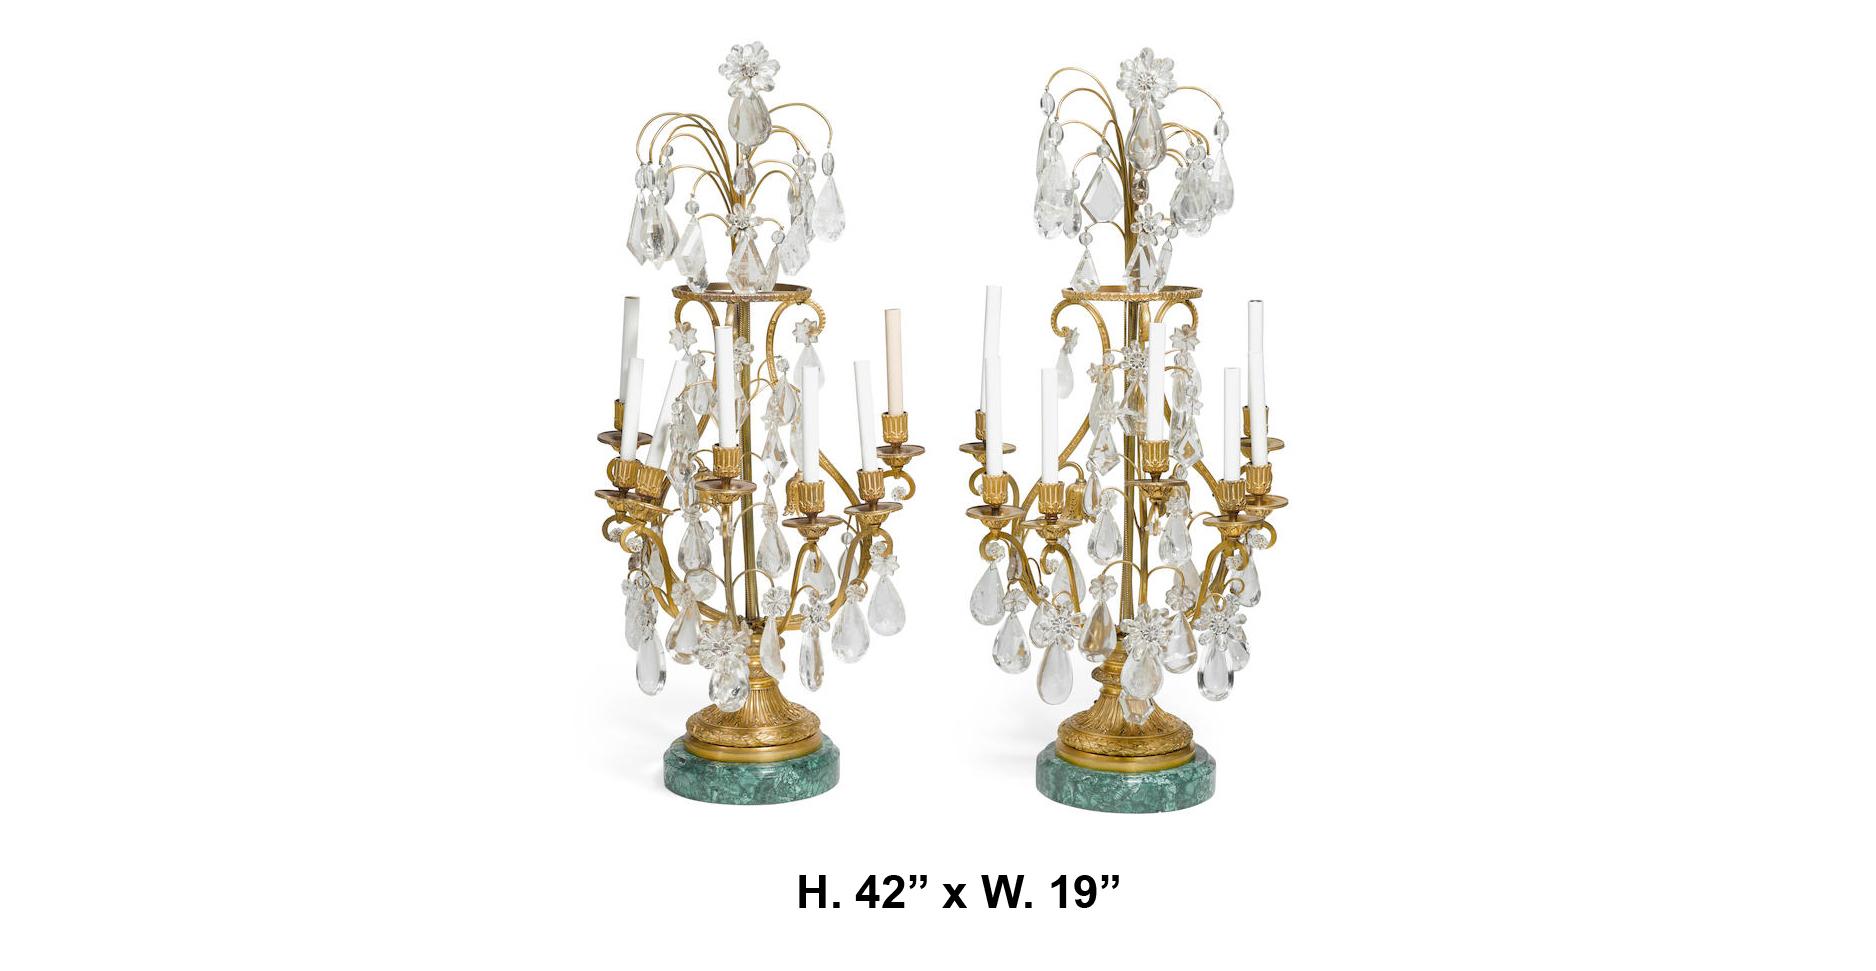 Spectacular and massive pair of 19th century French Louis XVI style rock crystal and fine quality ormolu-mounted nine-light girandoles with malachite veneered round bases. The rock crystal prisms used are top-tier quality, each piece is handcut and